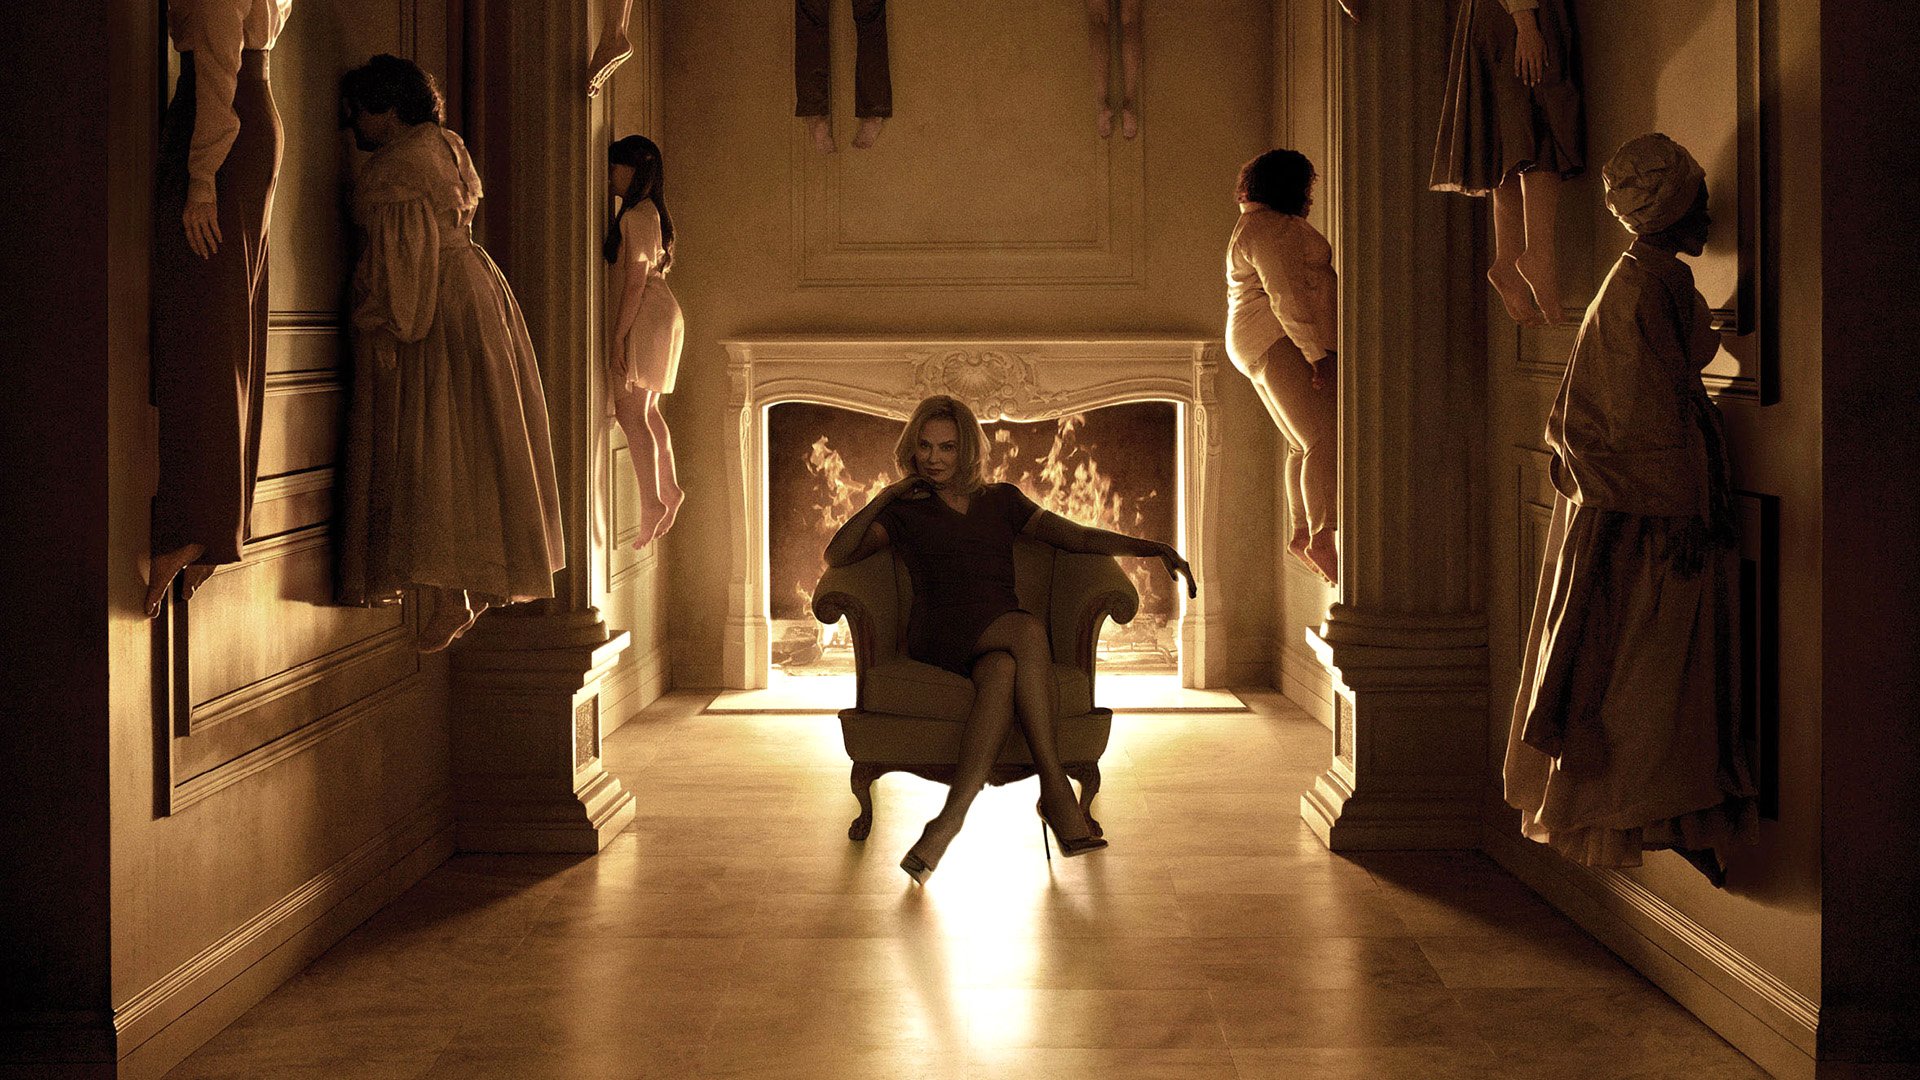 American Horror Story Coven HD Wallpaper Background Image